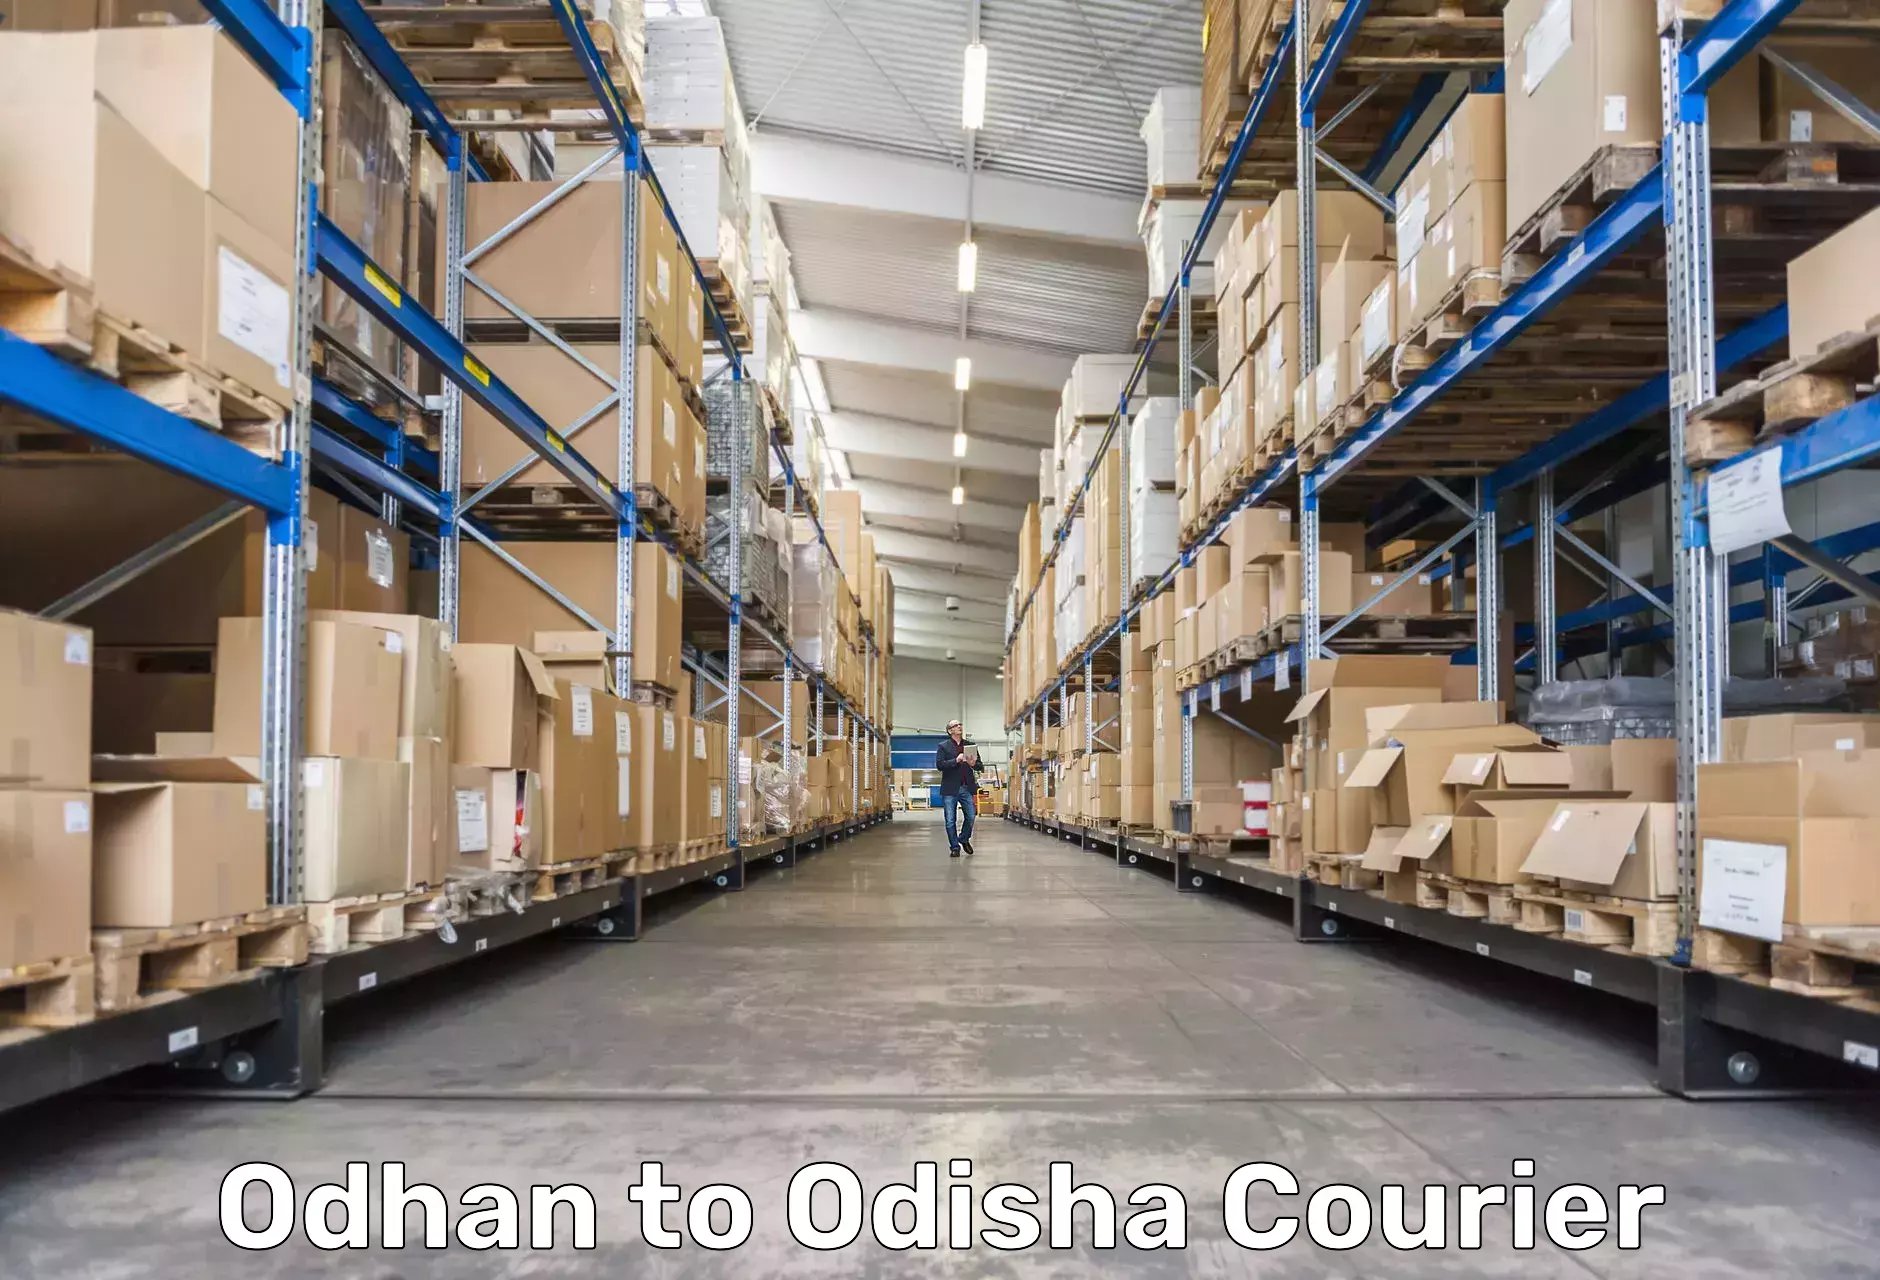 Express delivery network Odhan to Delang